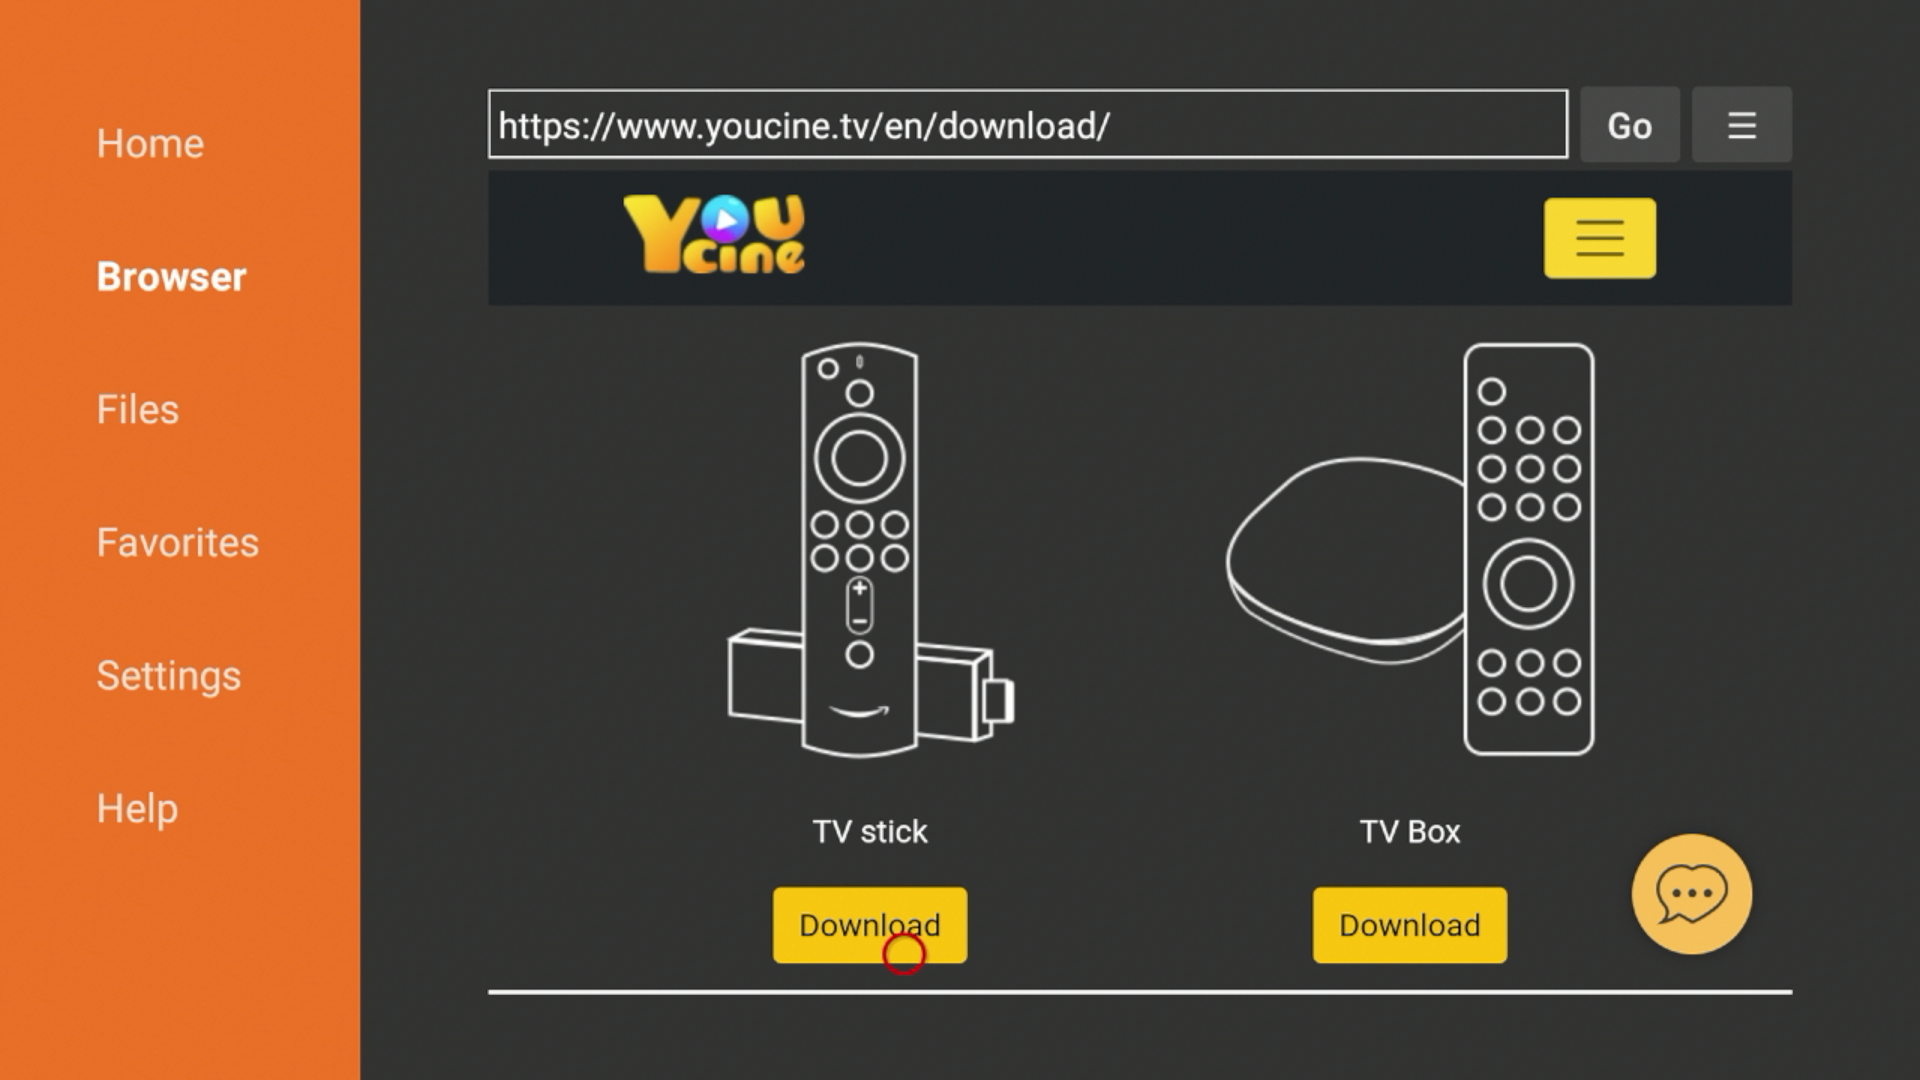 Scroll down and click Download at the bottom. "TV stick."